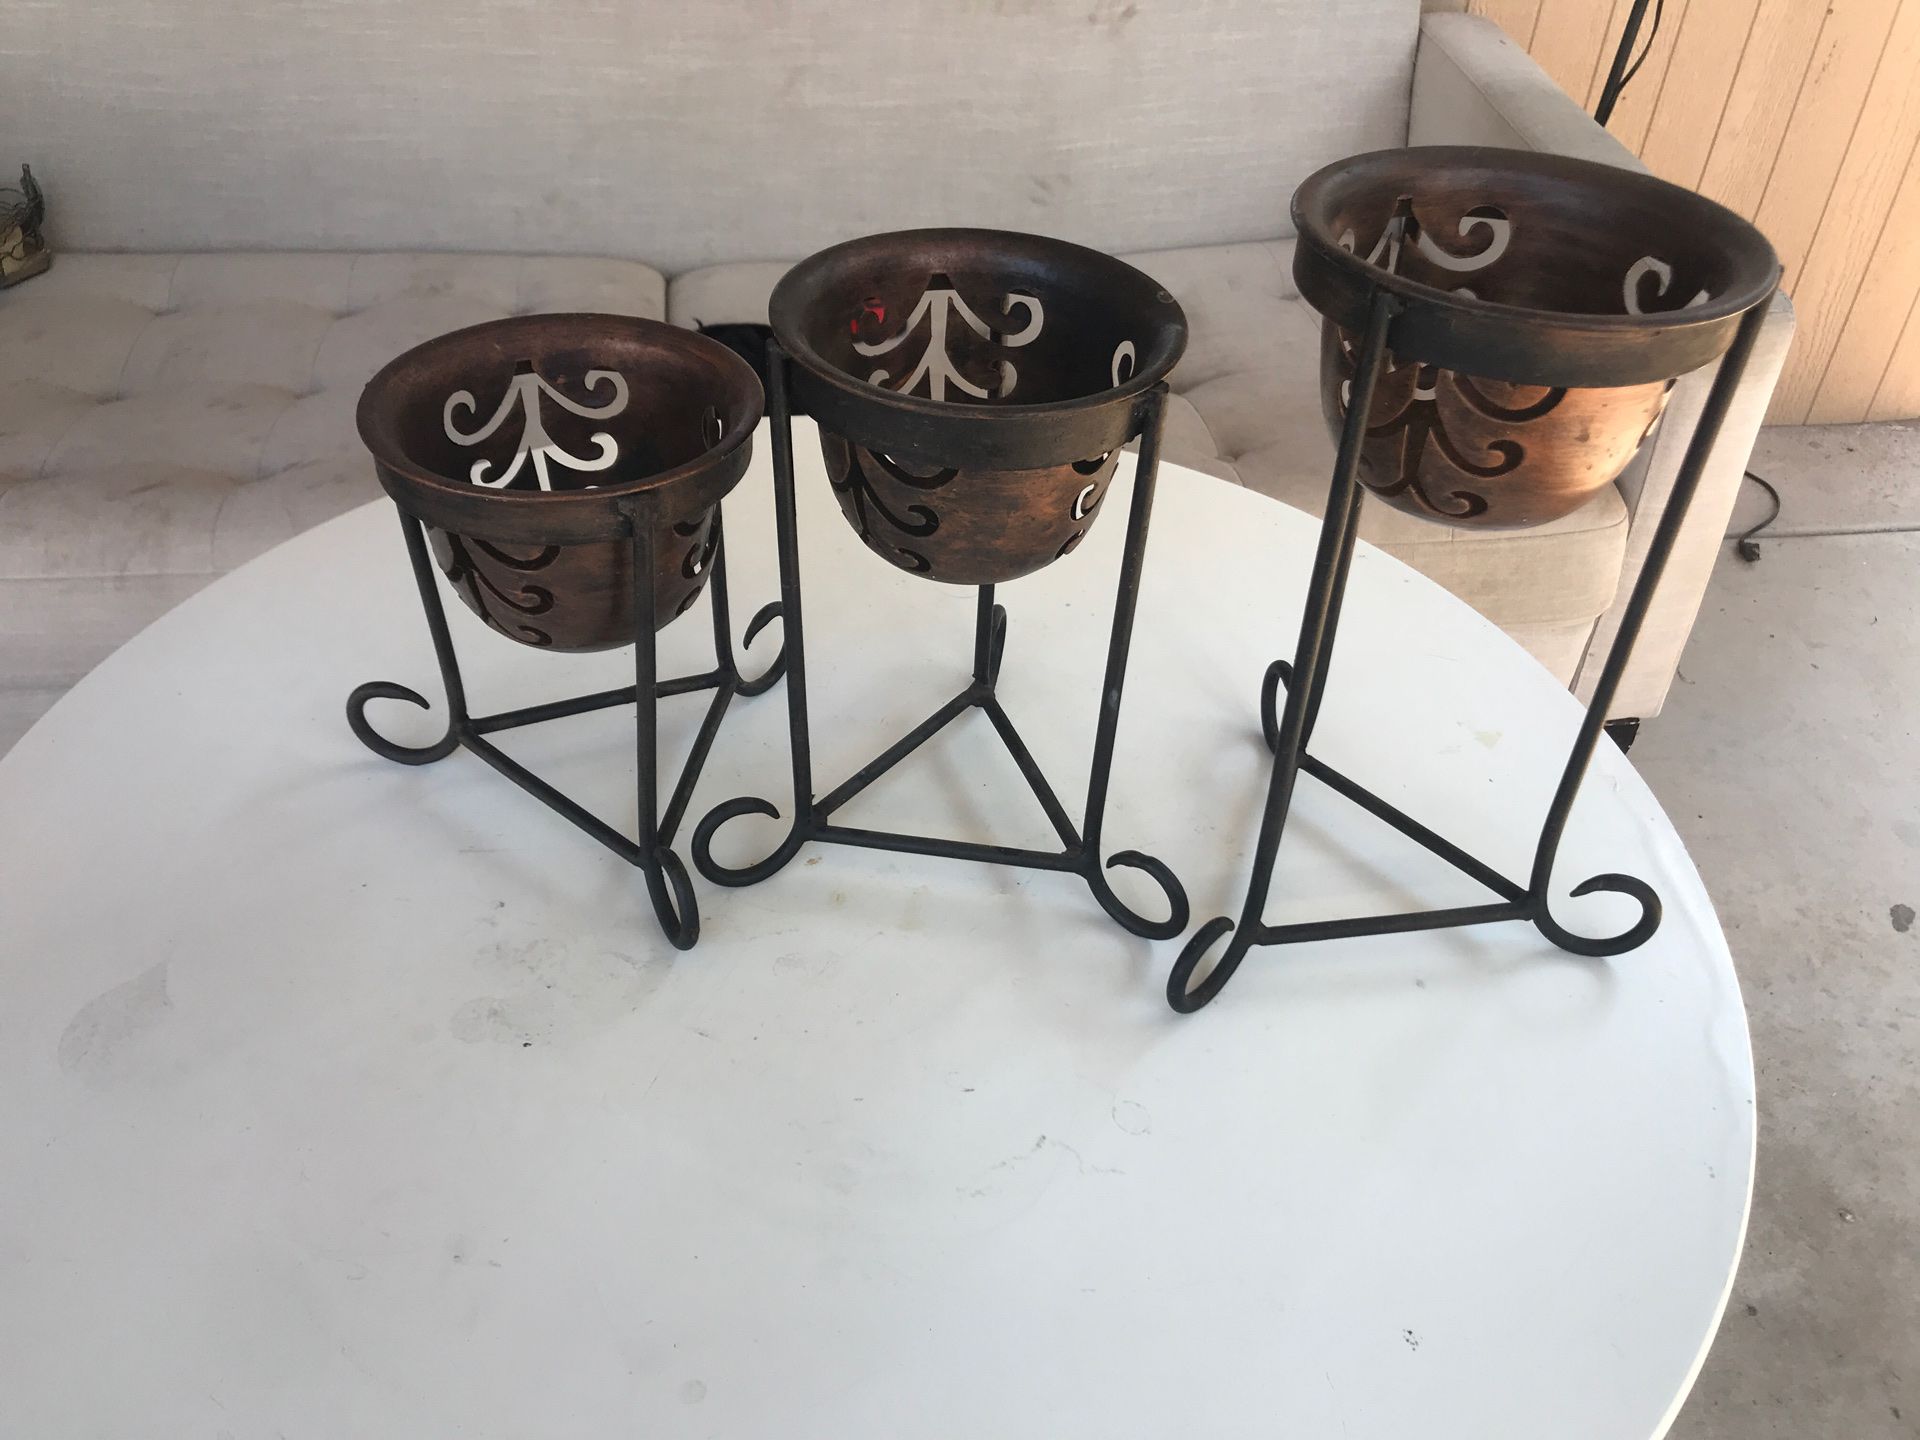 Vintage metal candle holders 8”,10” and 12” inches